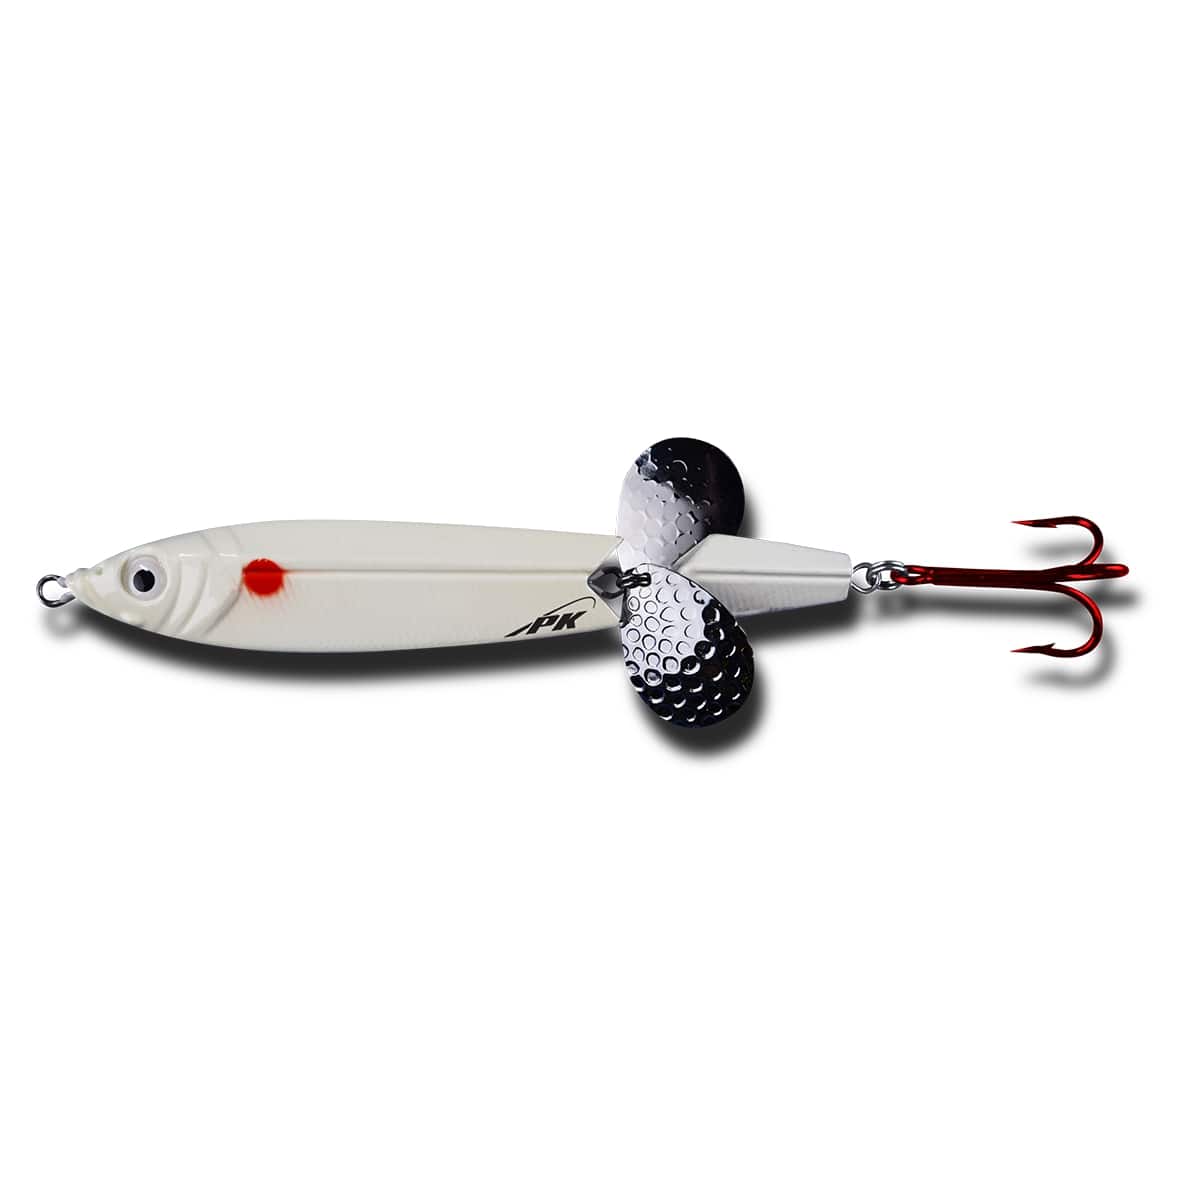 Pk Lures Panic Spoon Color Red Dot Glow Weight 1/2 oz